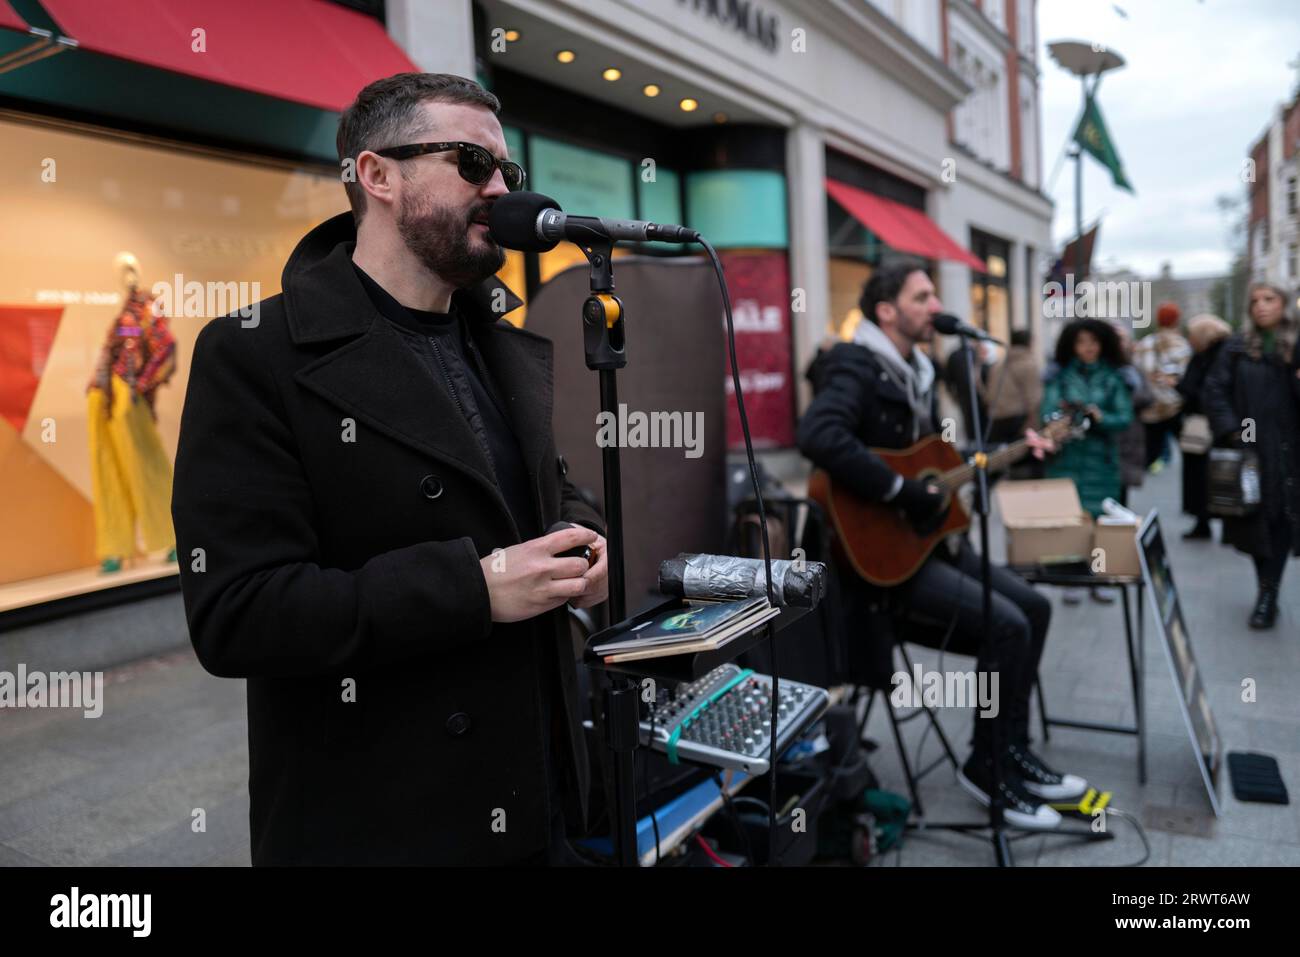 Andrew Kavanagh and Andrew Glover of the Irish rock group Keywest busking in Grafton Street. Dublin, Ireland, Europe Stock Photo